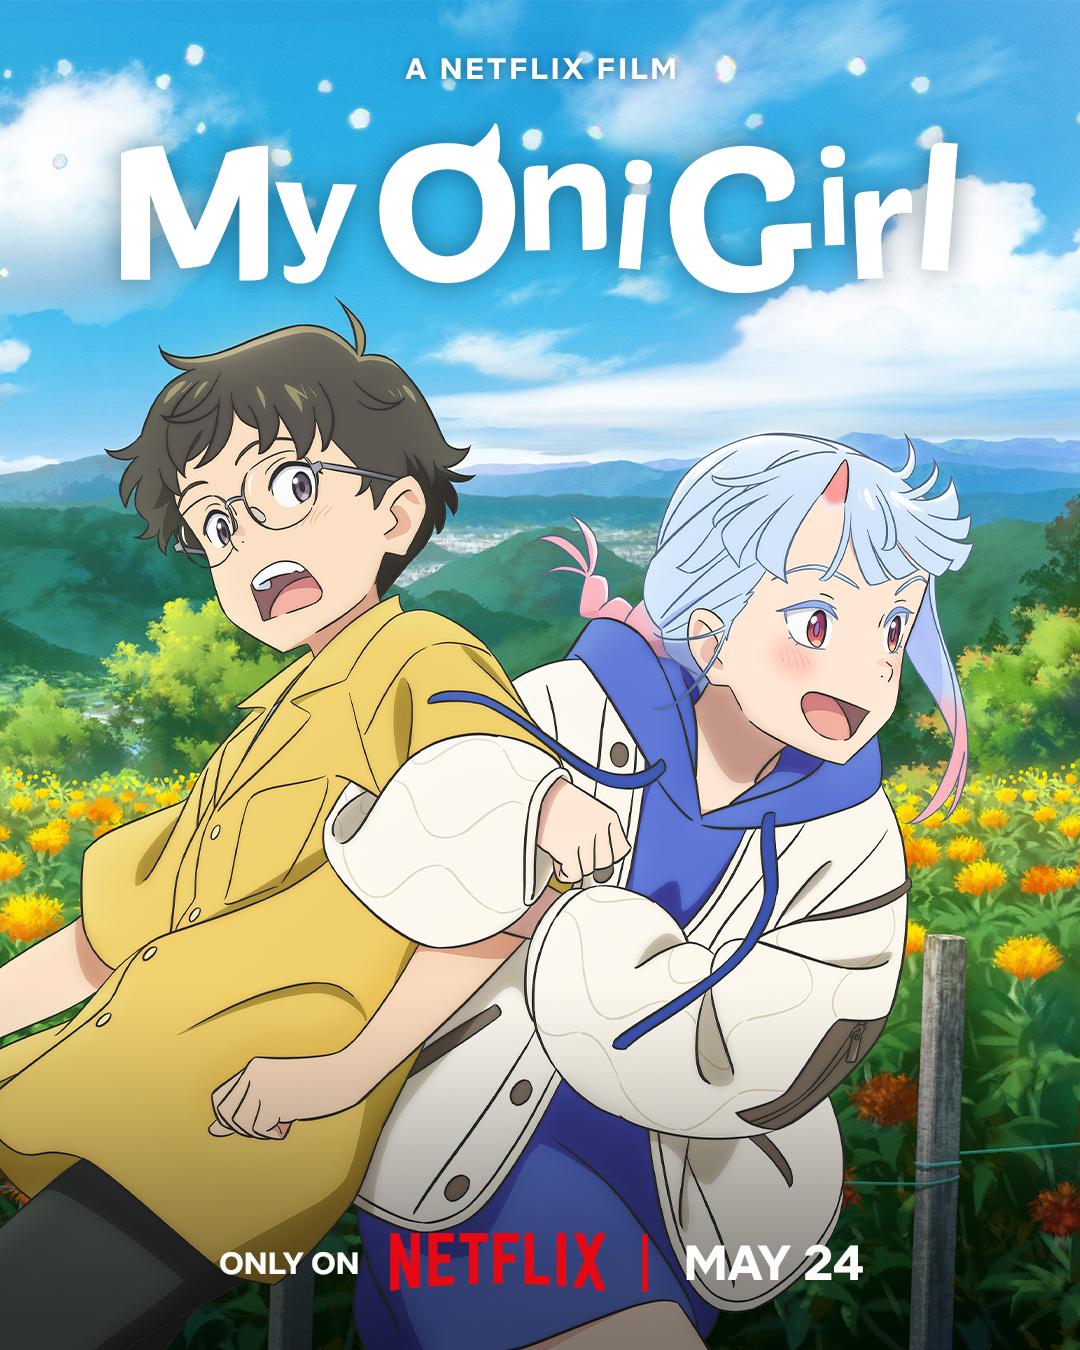 My Oni Girl (Netflix) – May 24My Oni Girl is a captivating fantasy story about Hiiragi Yatsuse, a high school student struggling to make friends due to his inability to refuse others’ requests. His mundane life takes a dramatic turn when he meets Tsumugi, an oni girl searching for her mother in the human world.